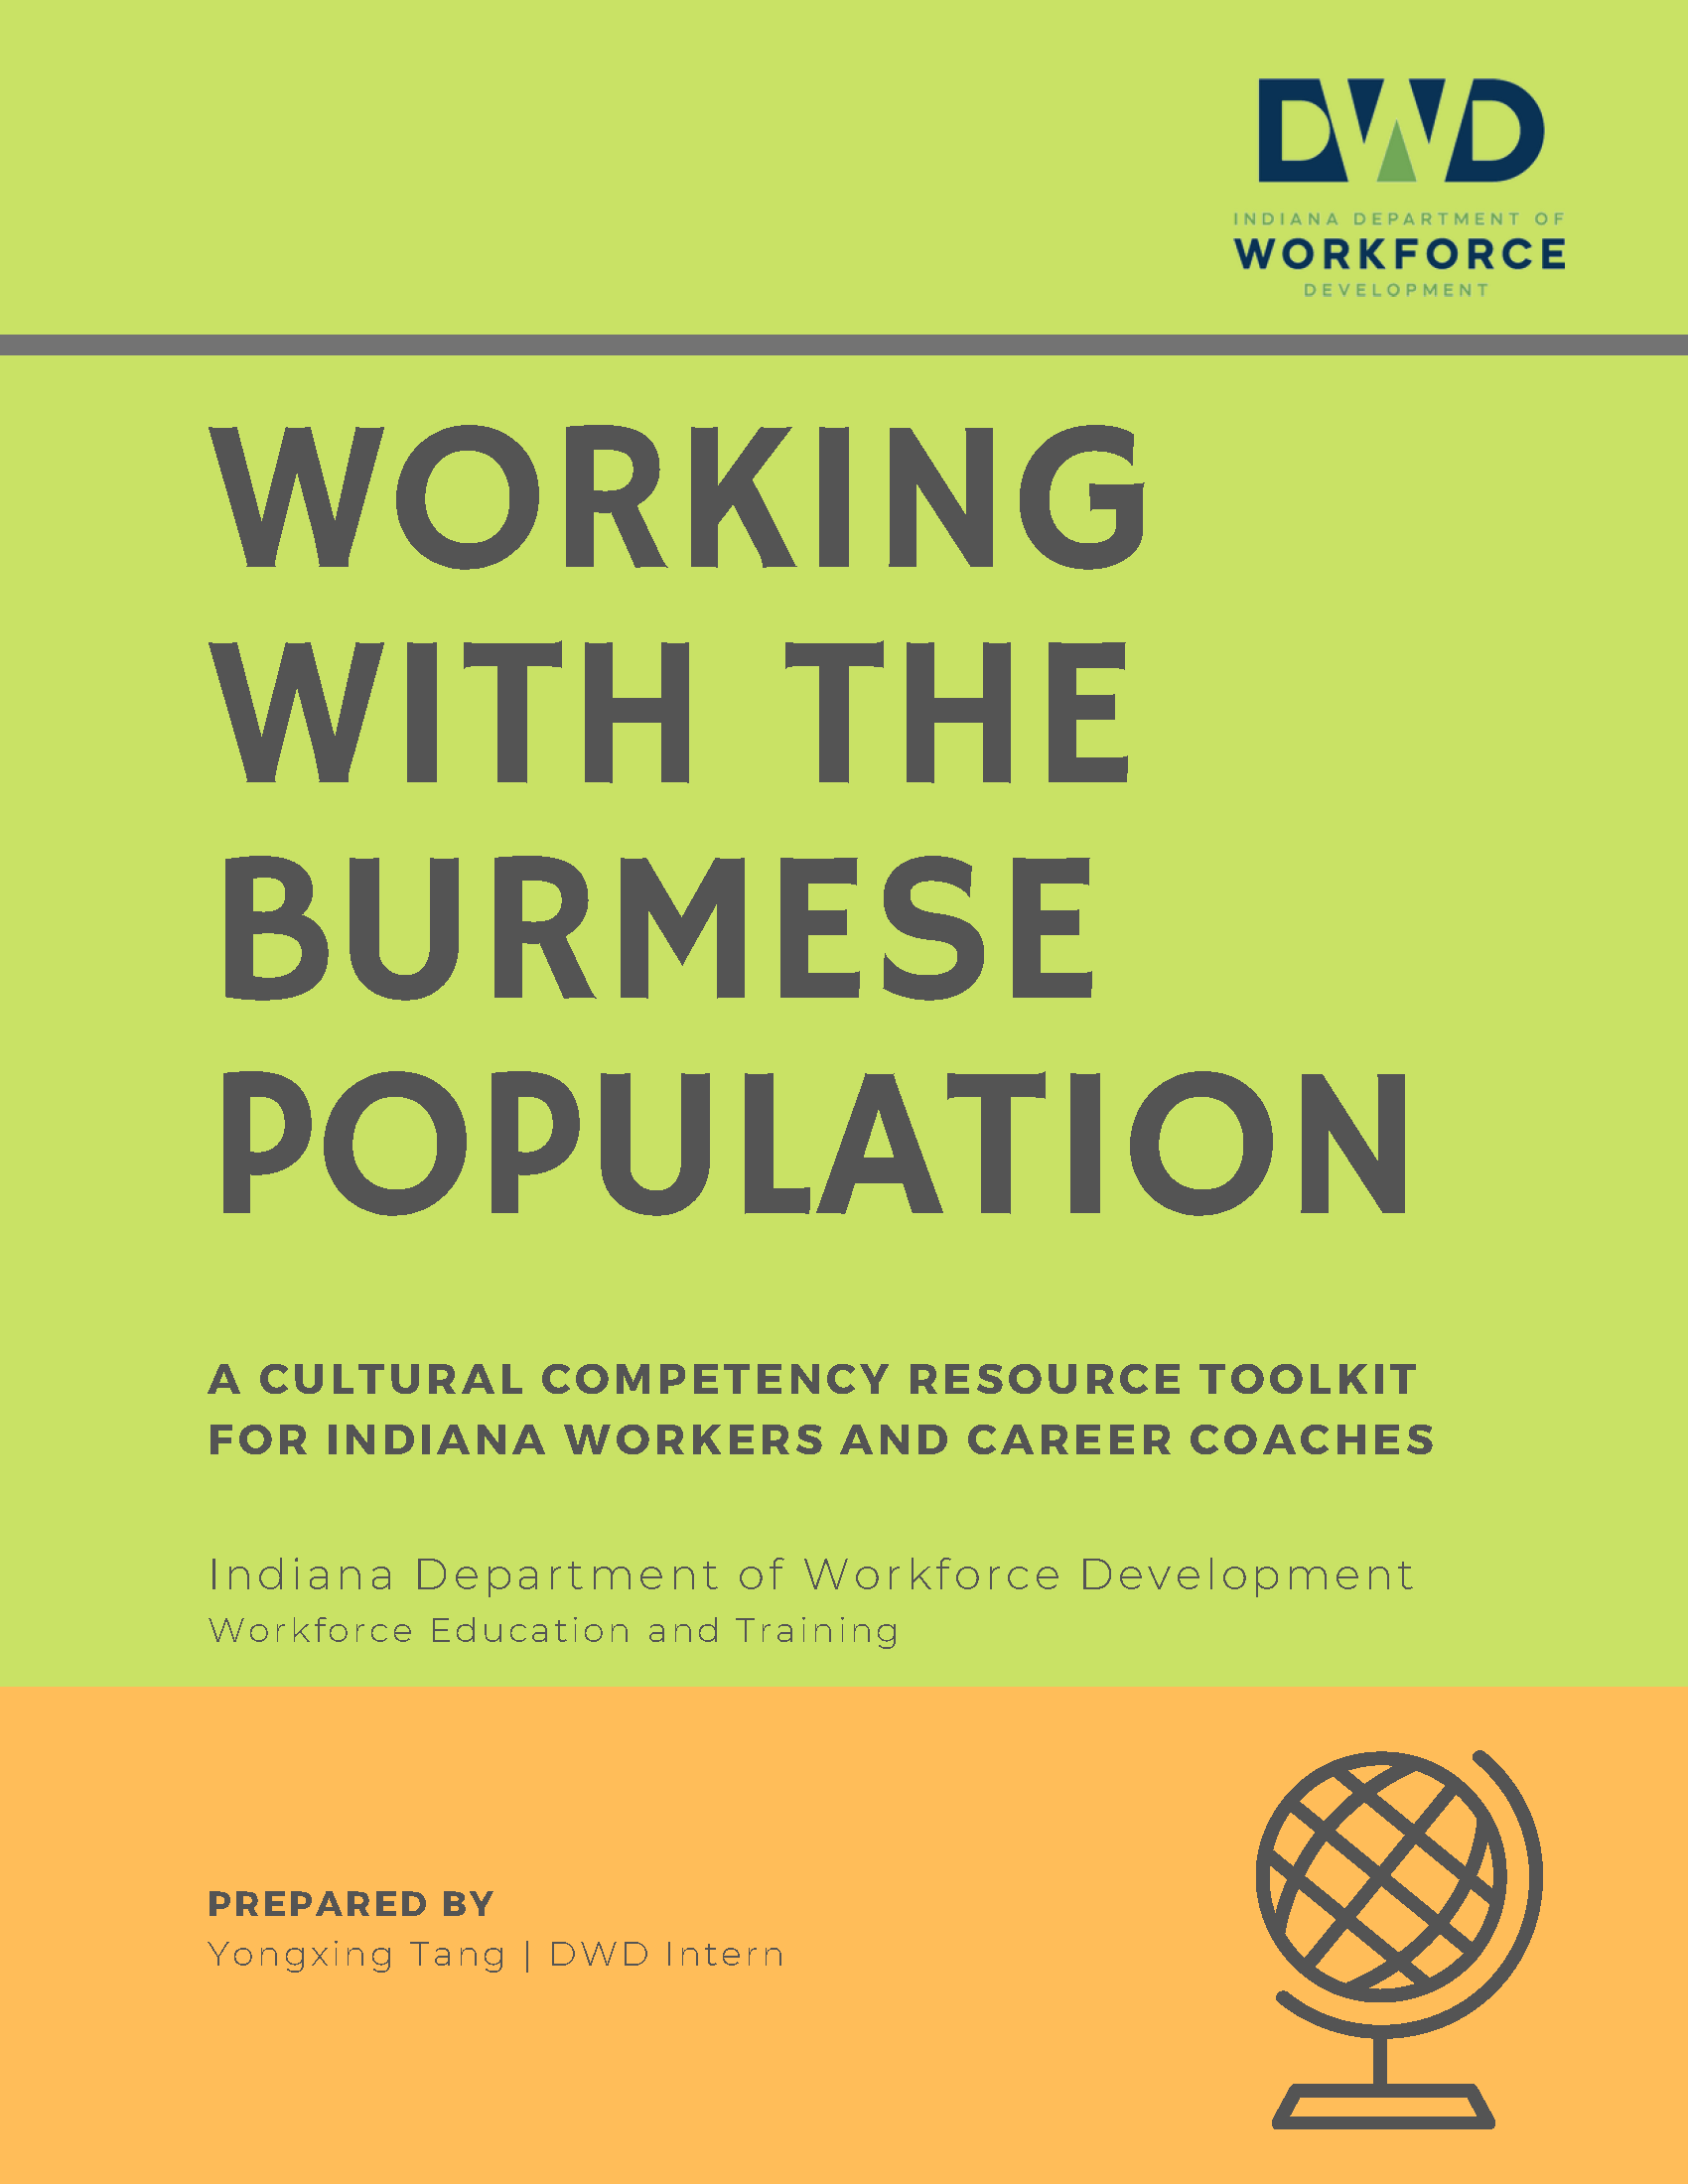 Download the Burmese Population Resource - Click the link associated with this image to download the resource.